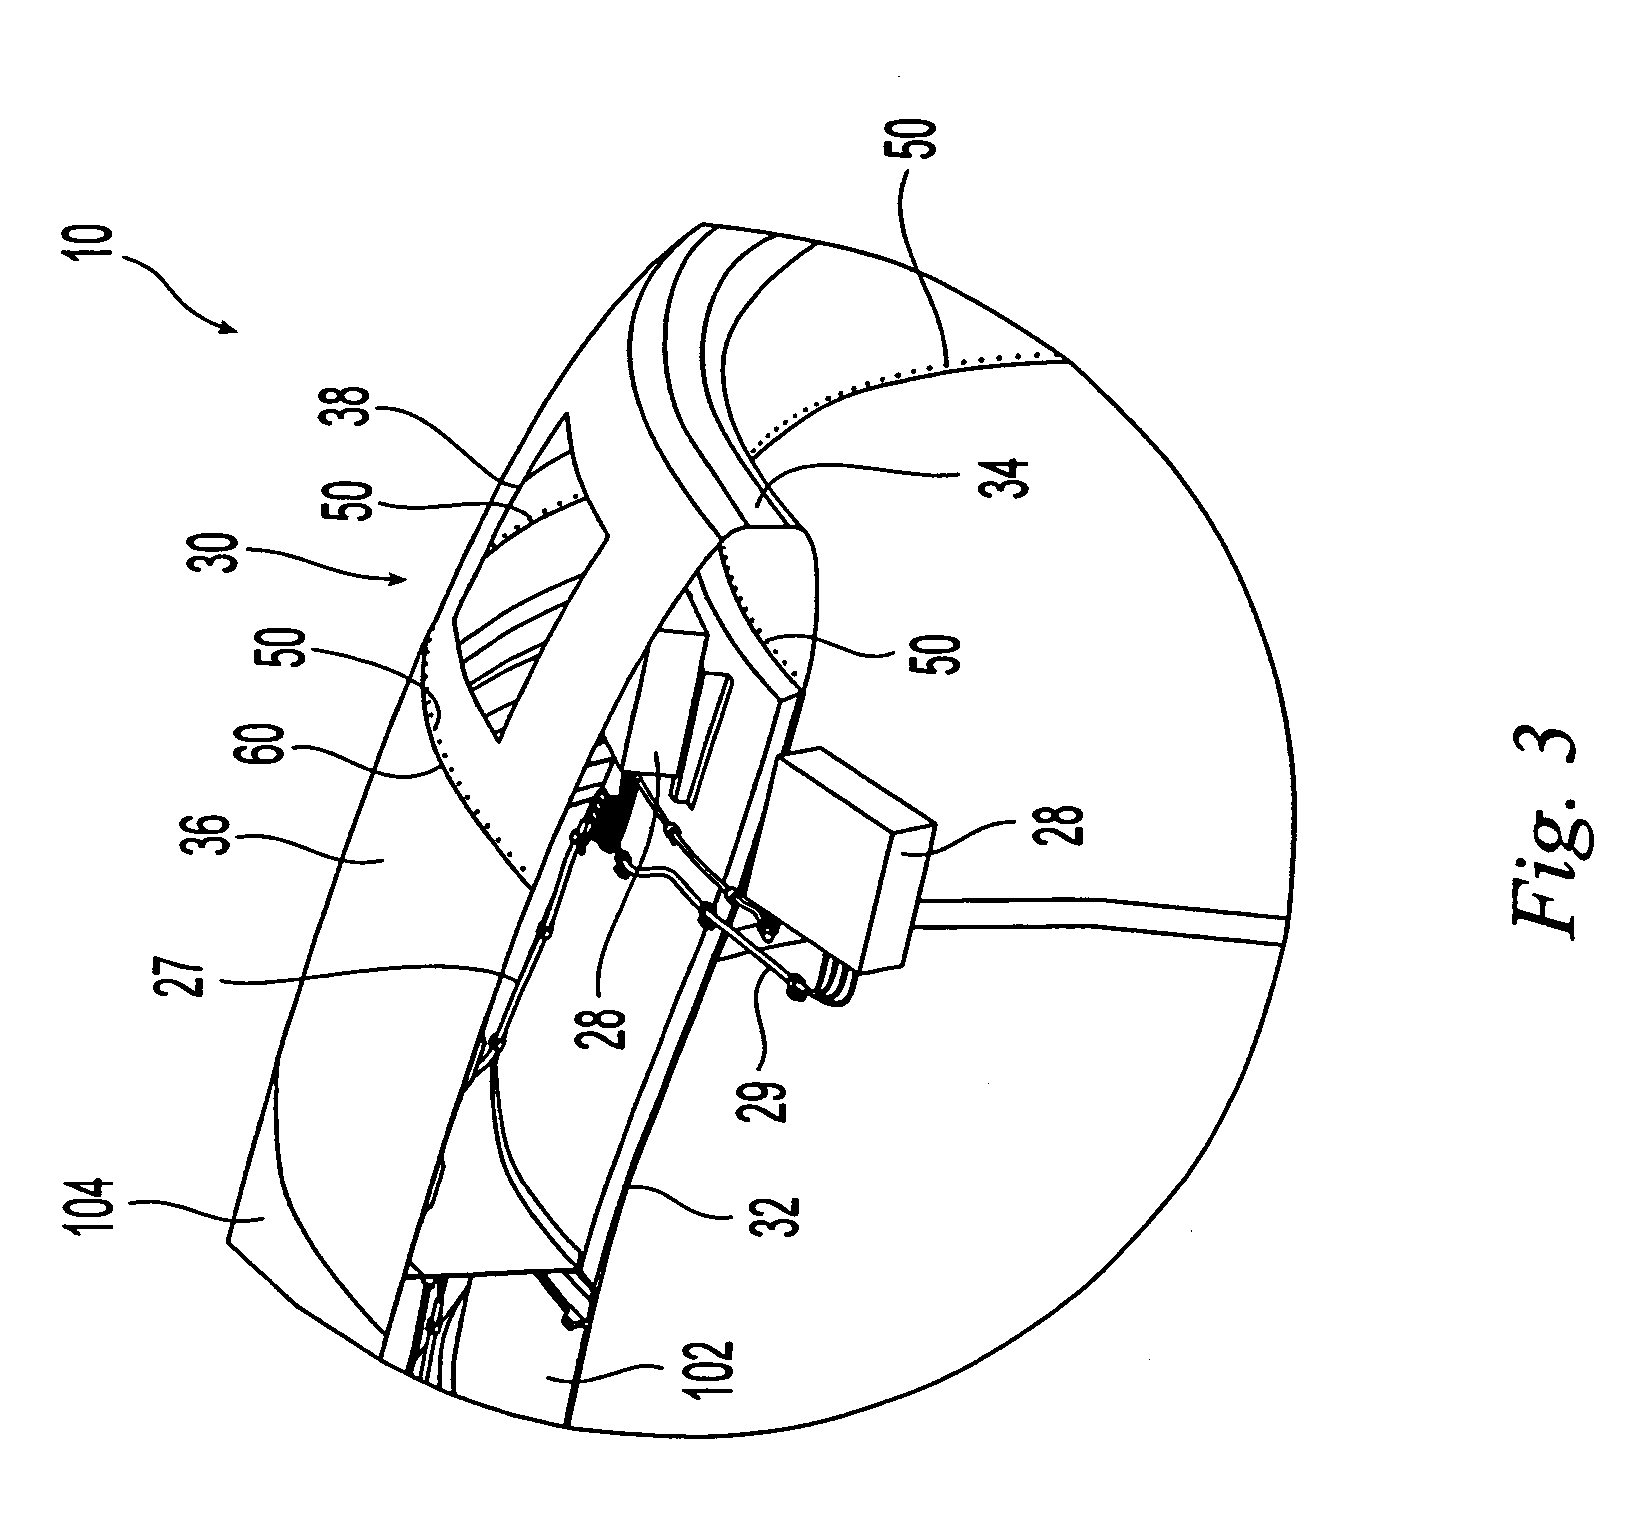 Aircraft engine nacelle inlet having electrical ice protection system